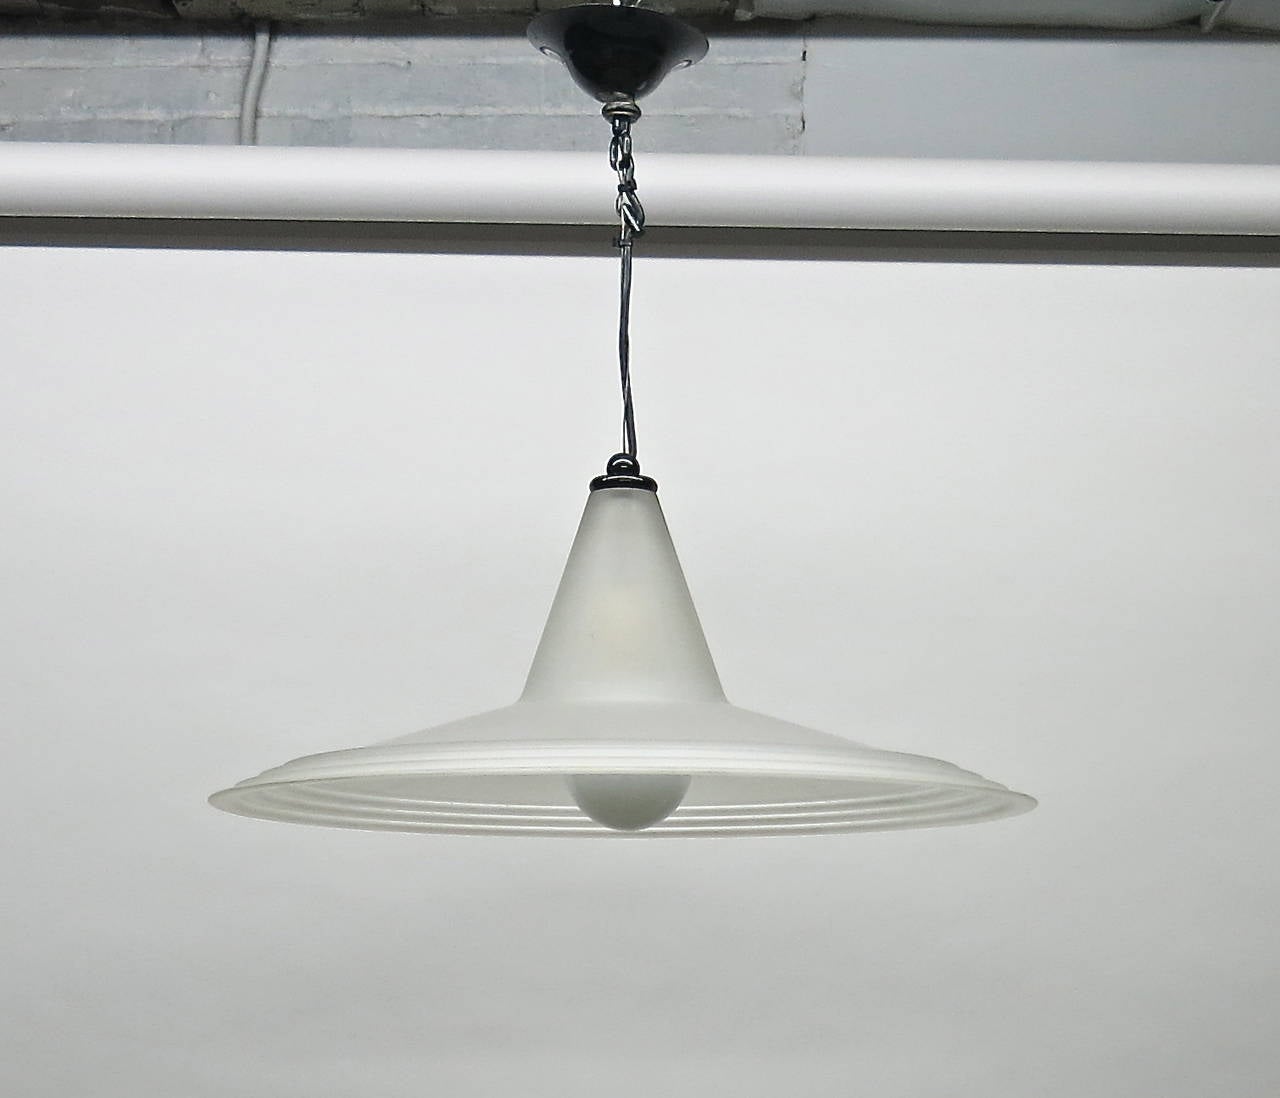 Ceiling fixture in sandblasted glass in the shape of a saucer with a cone top that hides a single standard American socket attached to the original canopy by a thin metal safety wire, to support the weight, and black electrical wire that can be made